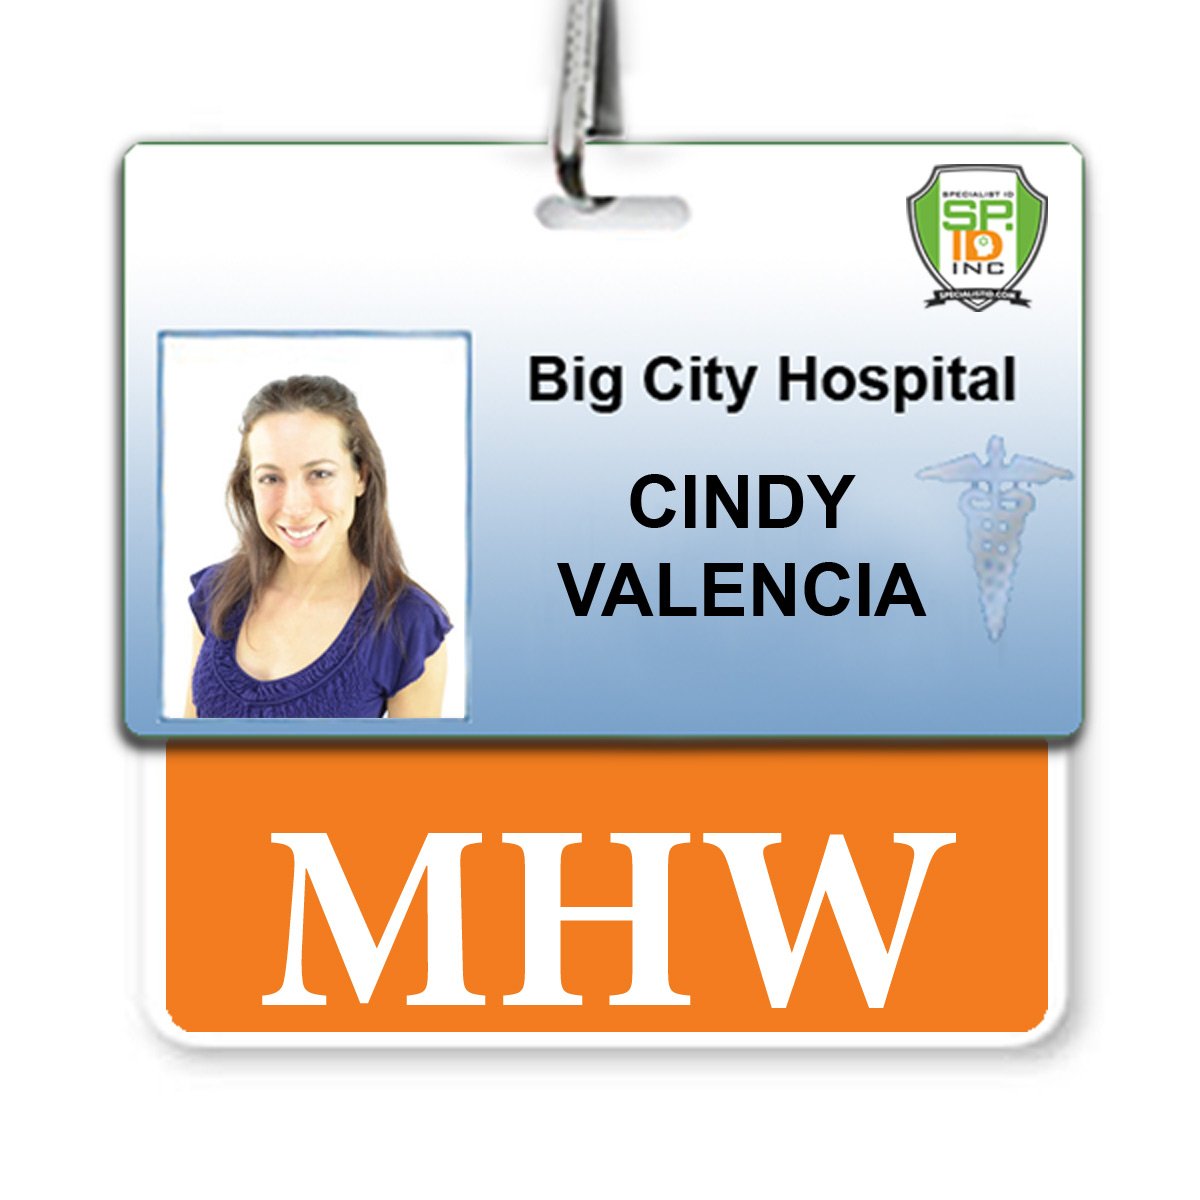 ID badge for Big City Hospital with a photo of a person wearing a blue shirt. The badge displays the name "Cindy Valencia" and includes an additional tag labeled "MHW." The MHW Horizontal Badge Buddy with Orange Border features an orange border, adding both visibility and style.